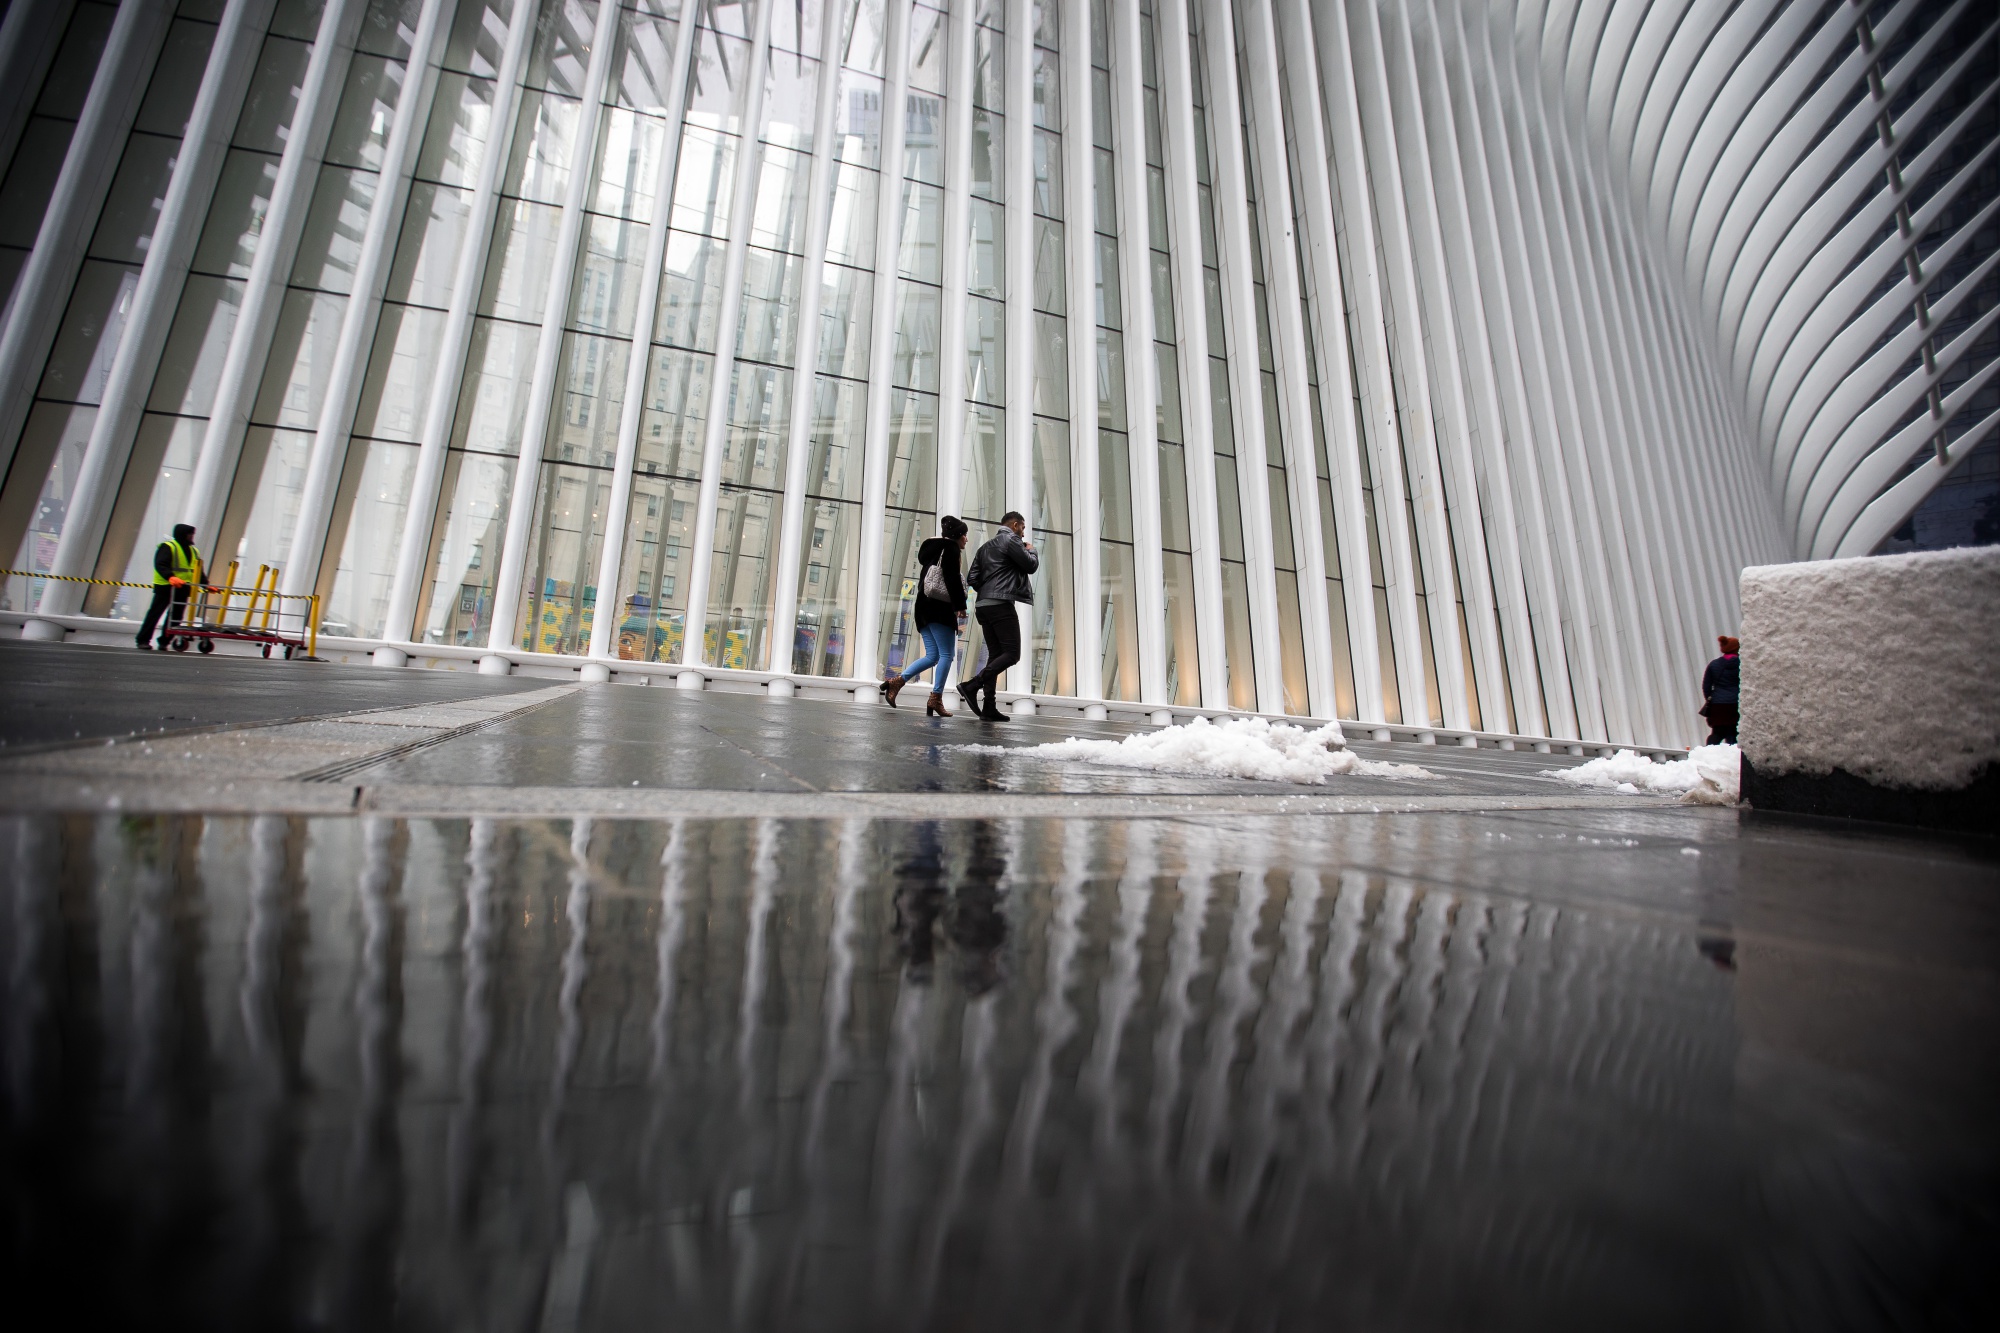 Pedestrians pass in front of the Oculus transportation hub in New York.